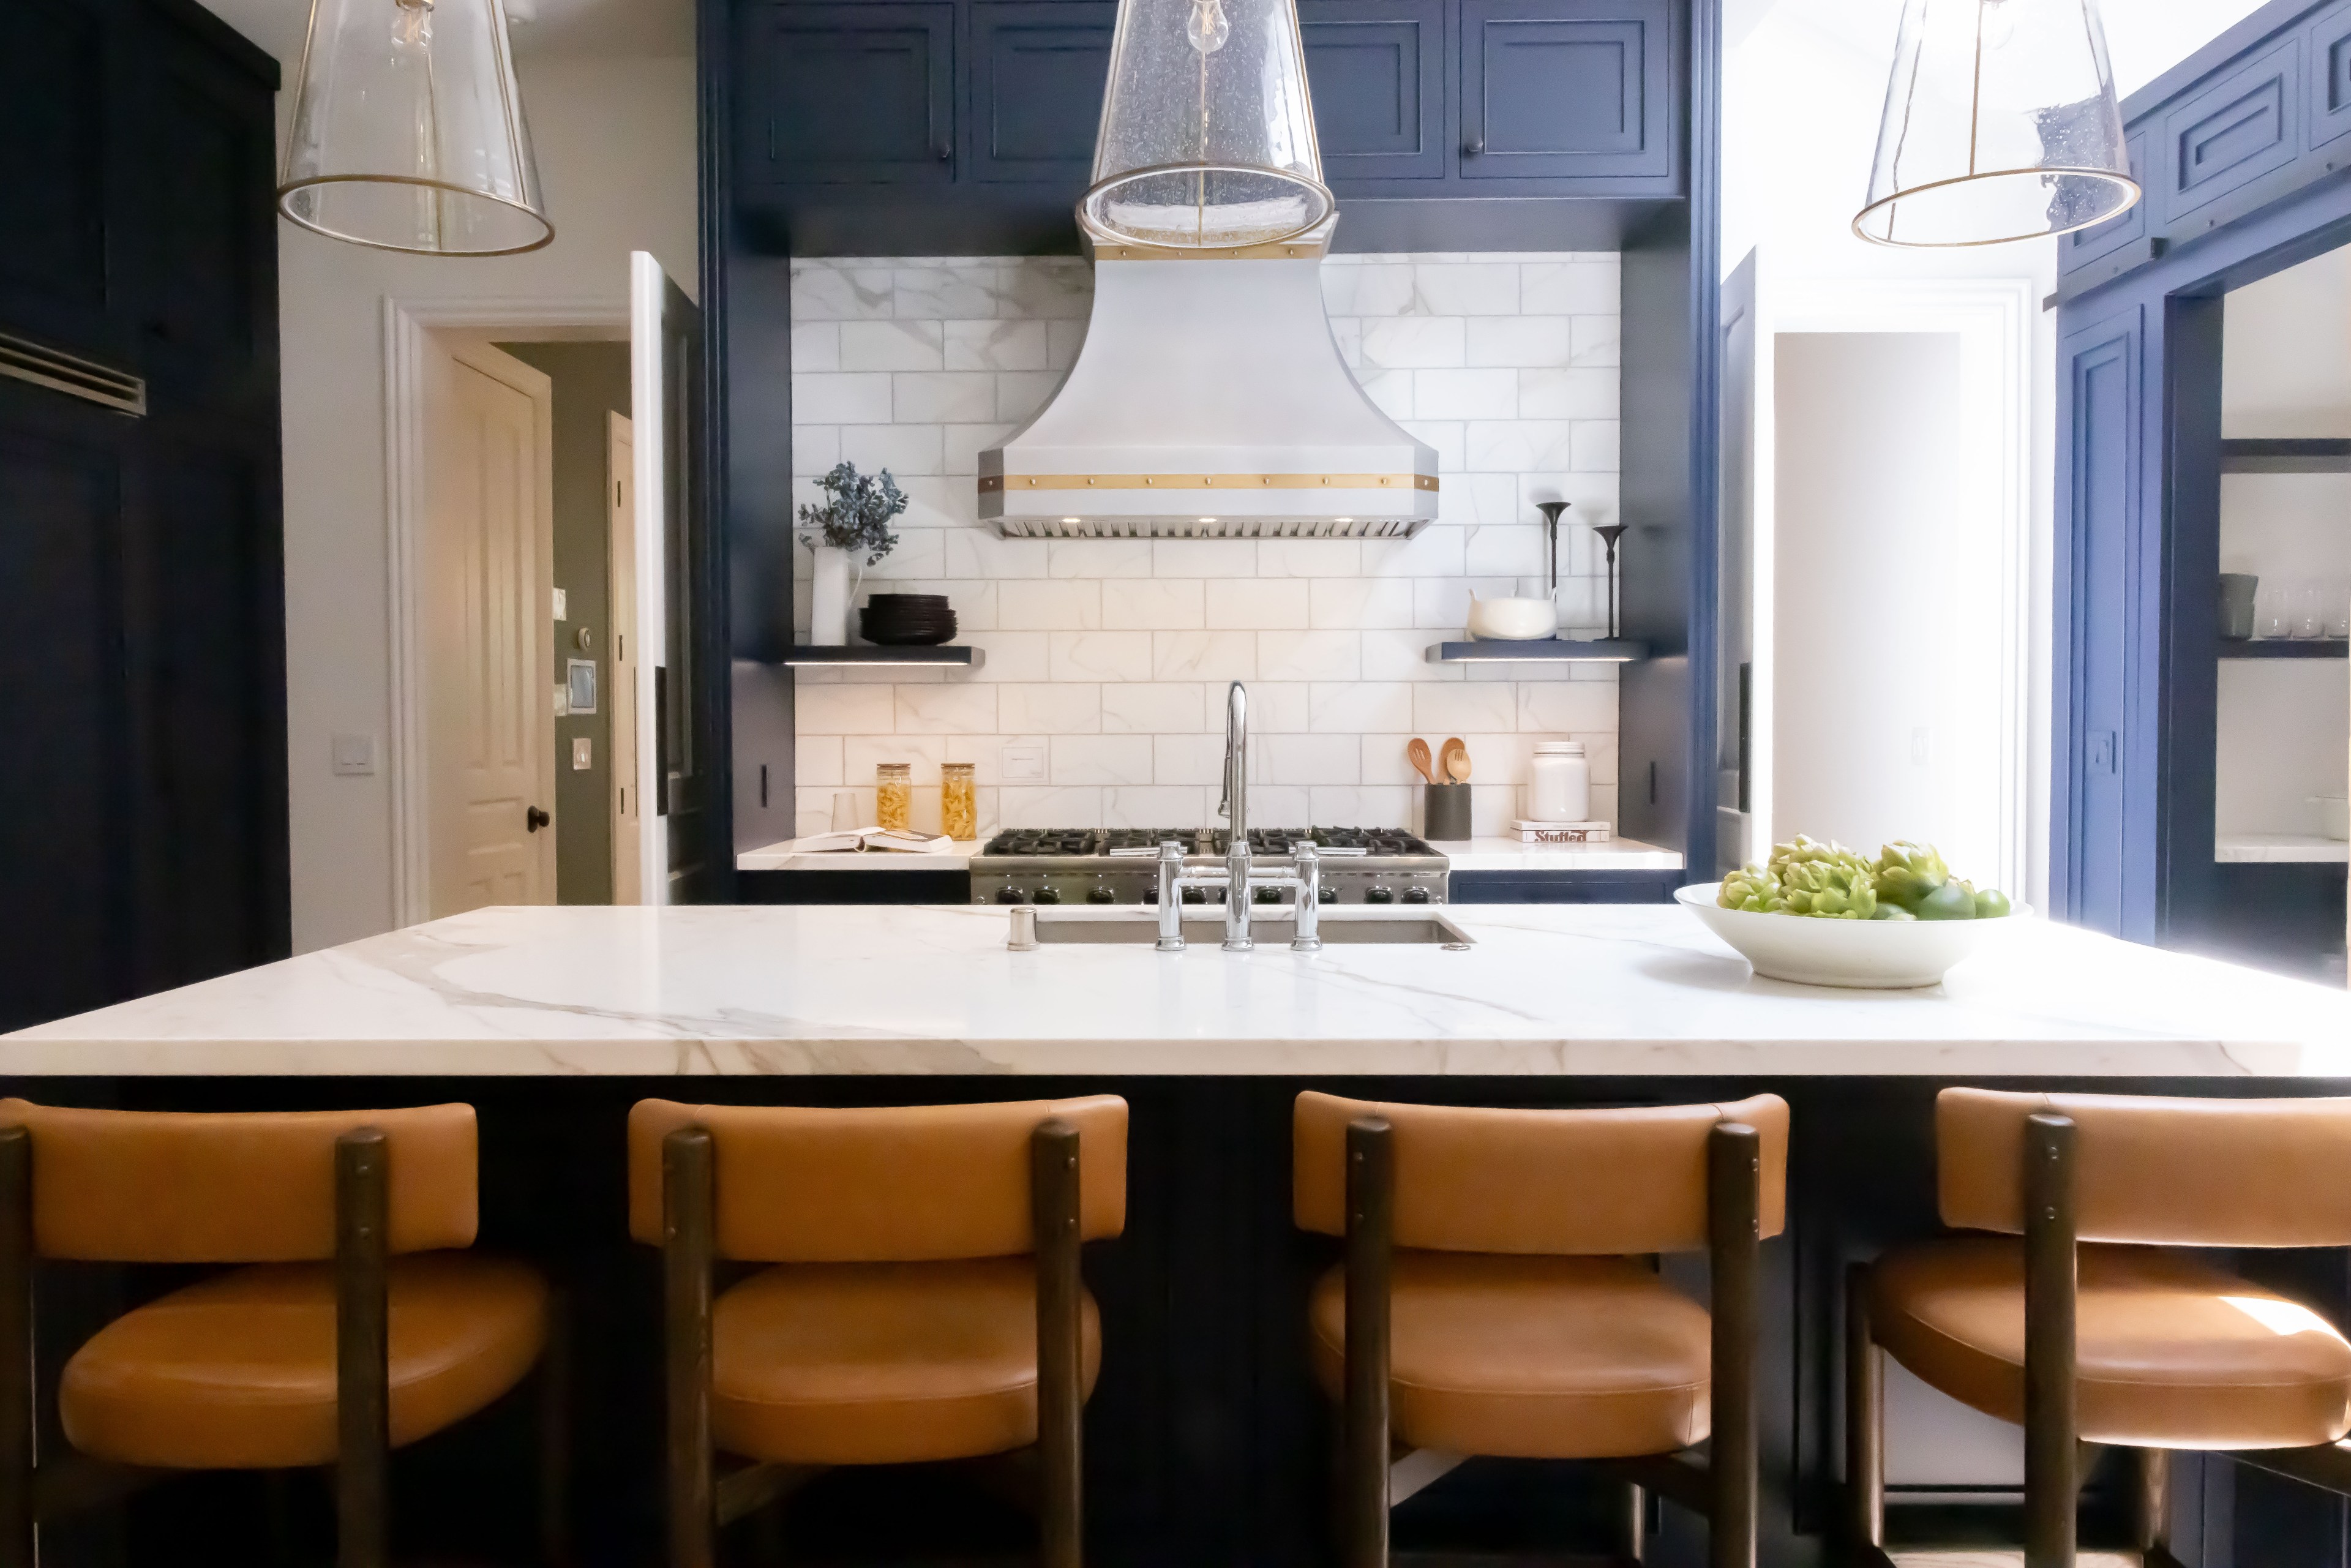 The image shows a modern kitchen with a large white marble island, four tan leather barstools, navy cabinets, stainless steel appliances, and hanging glass pendant lights.